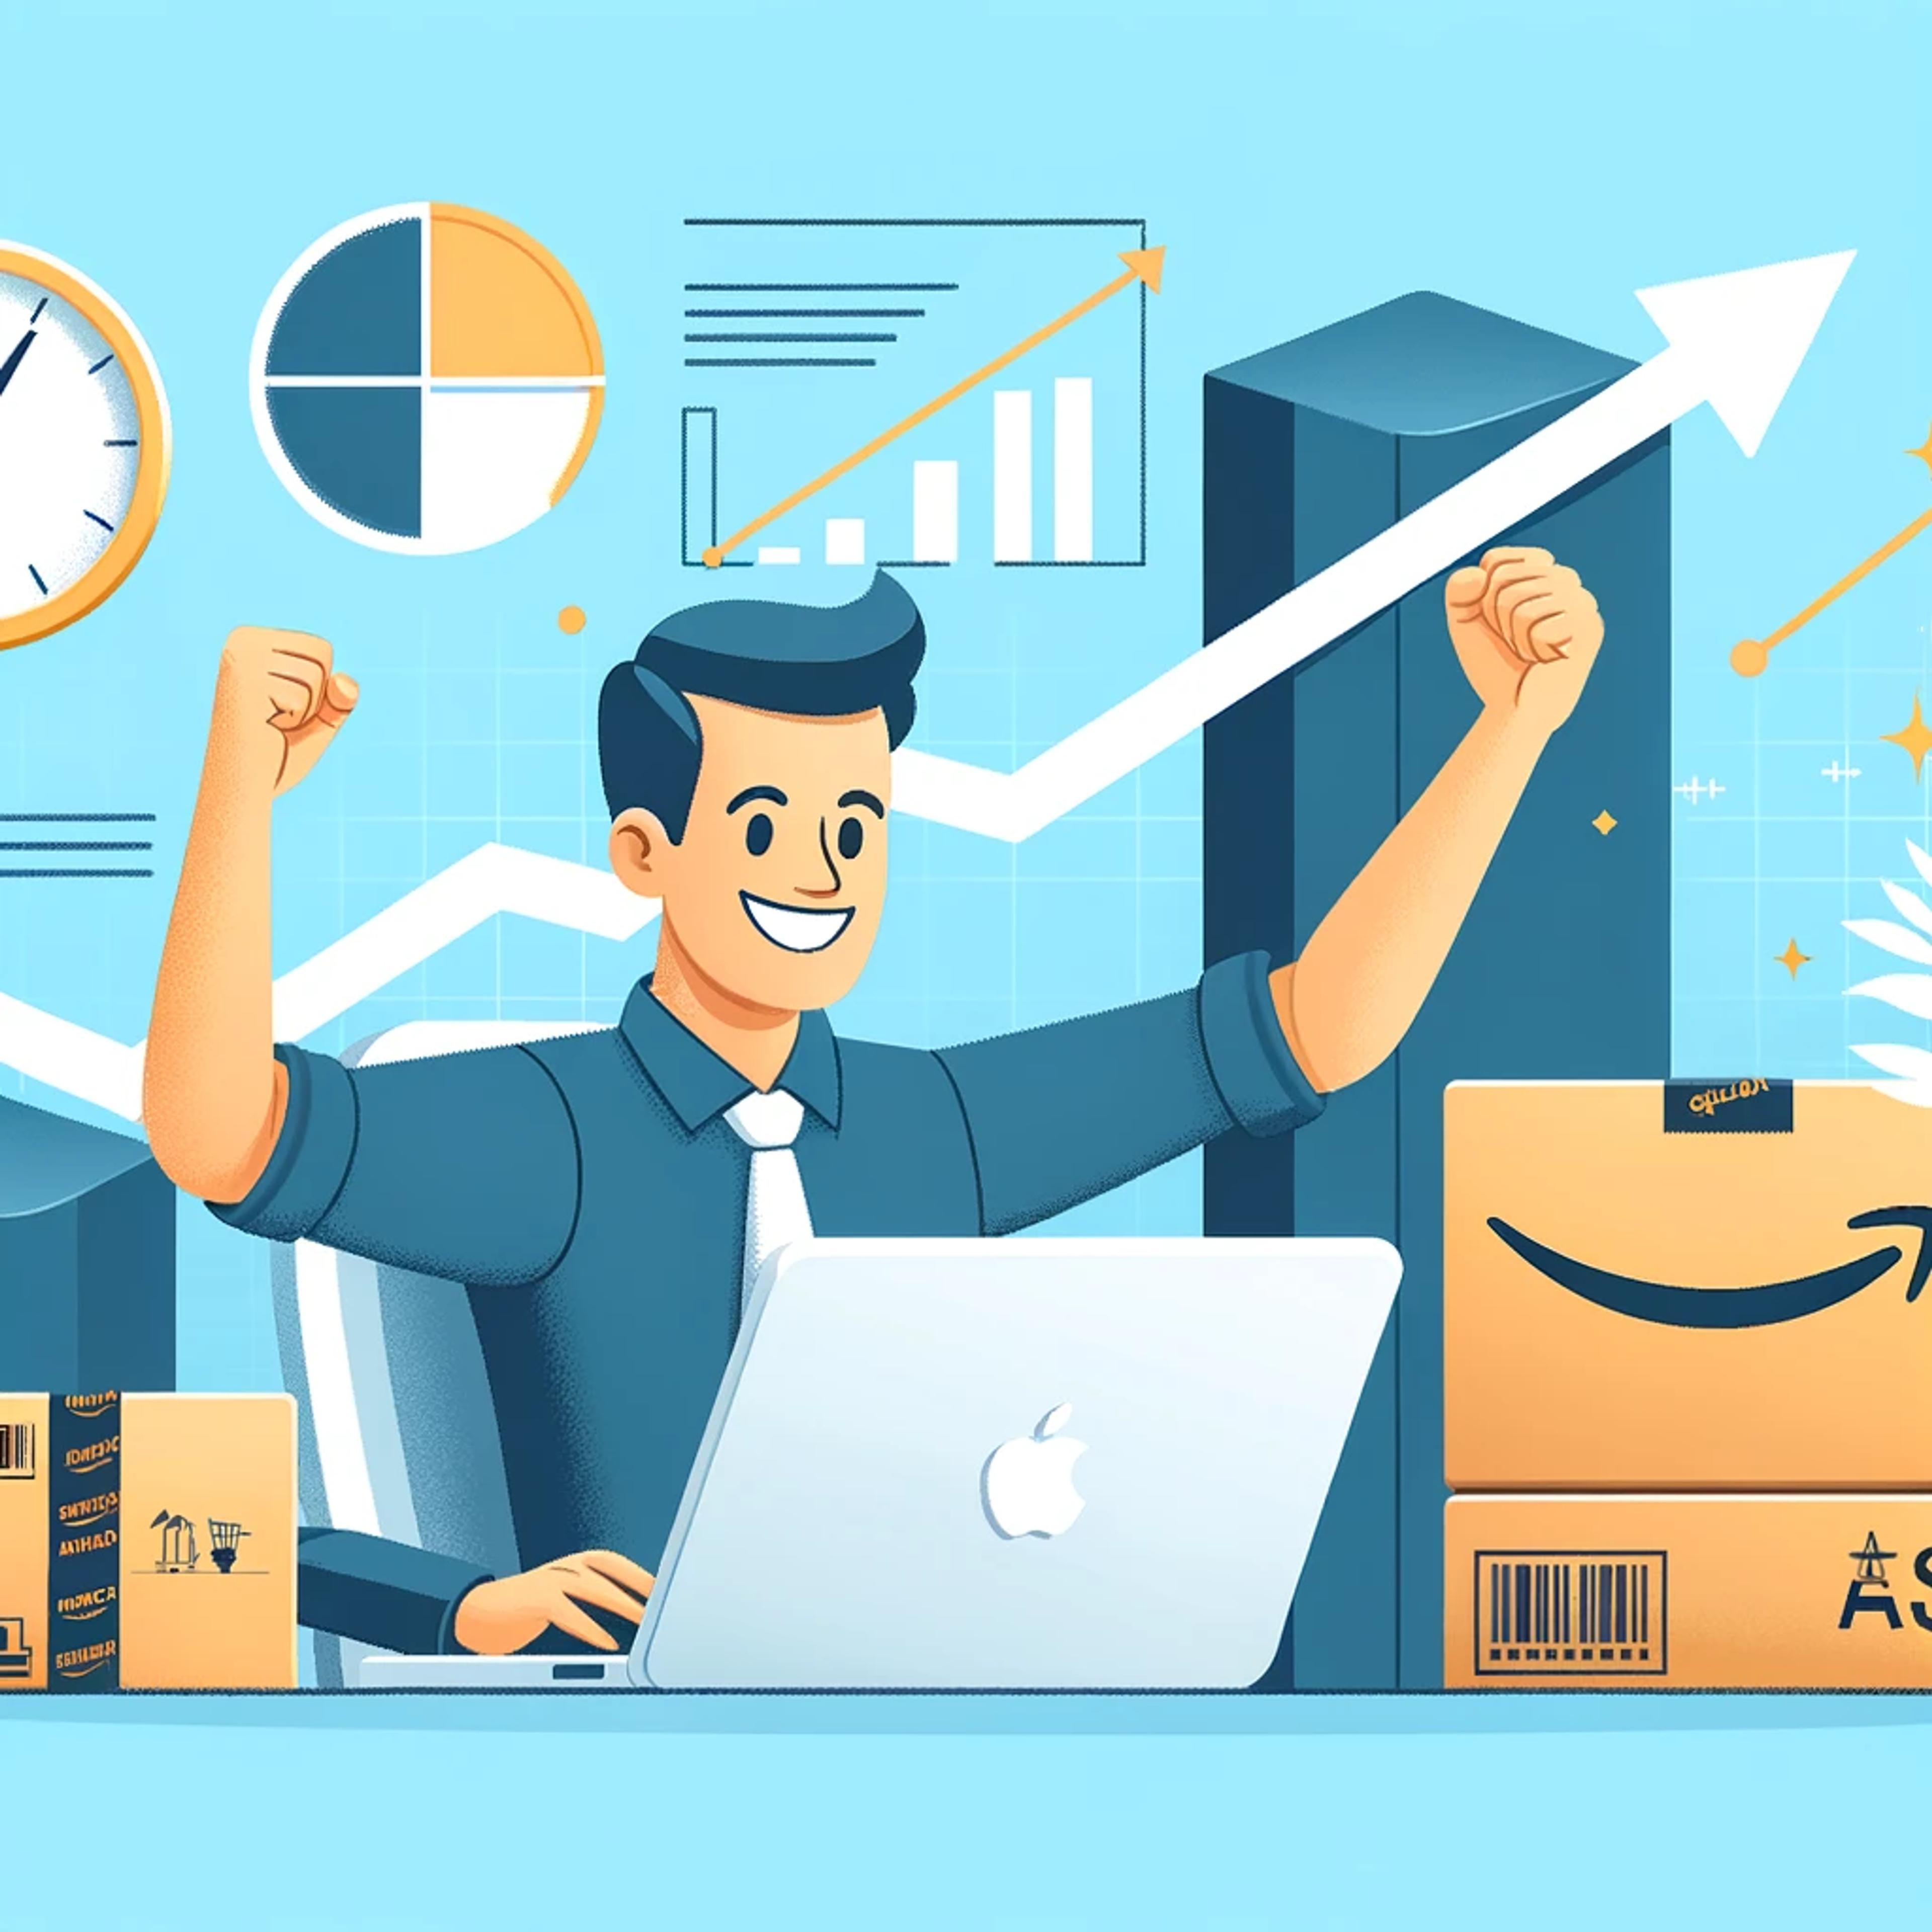 Animated person cheering for Amazon success